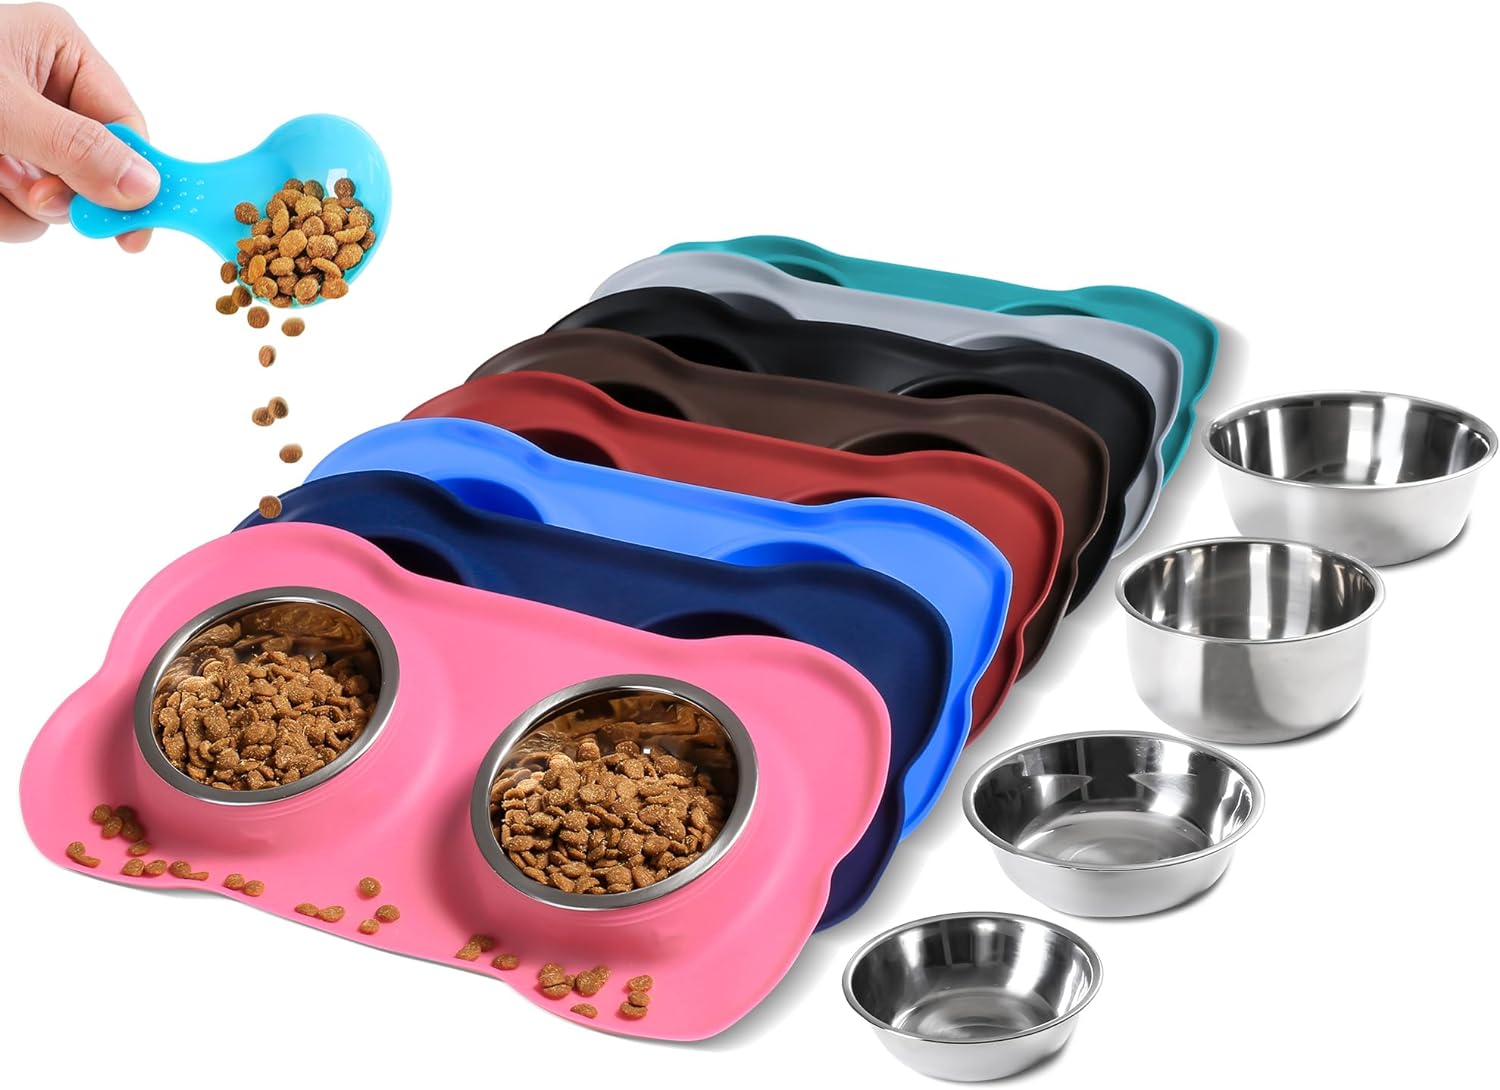 Feeder with 2 bowls and a rubber matt underneath